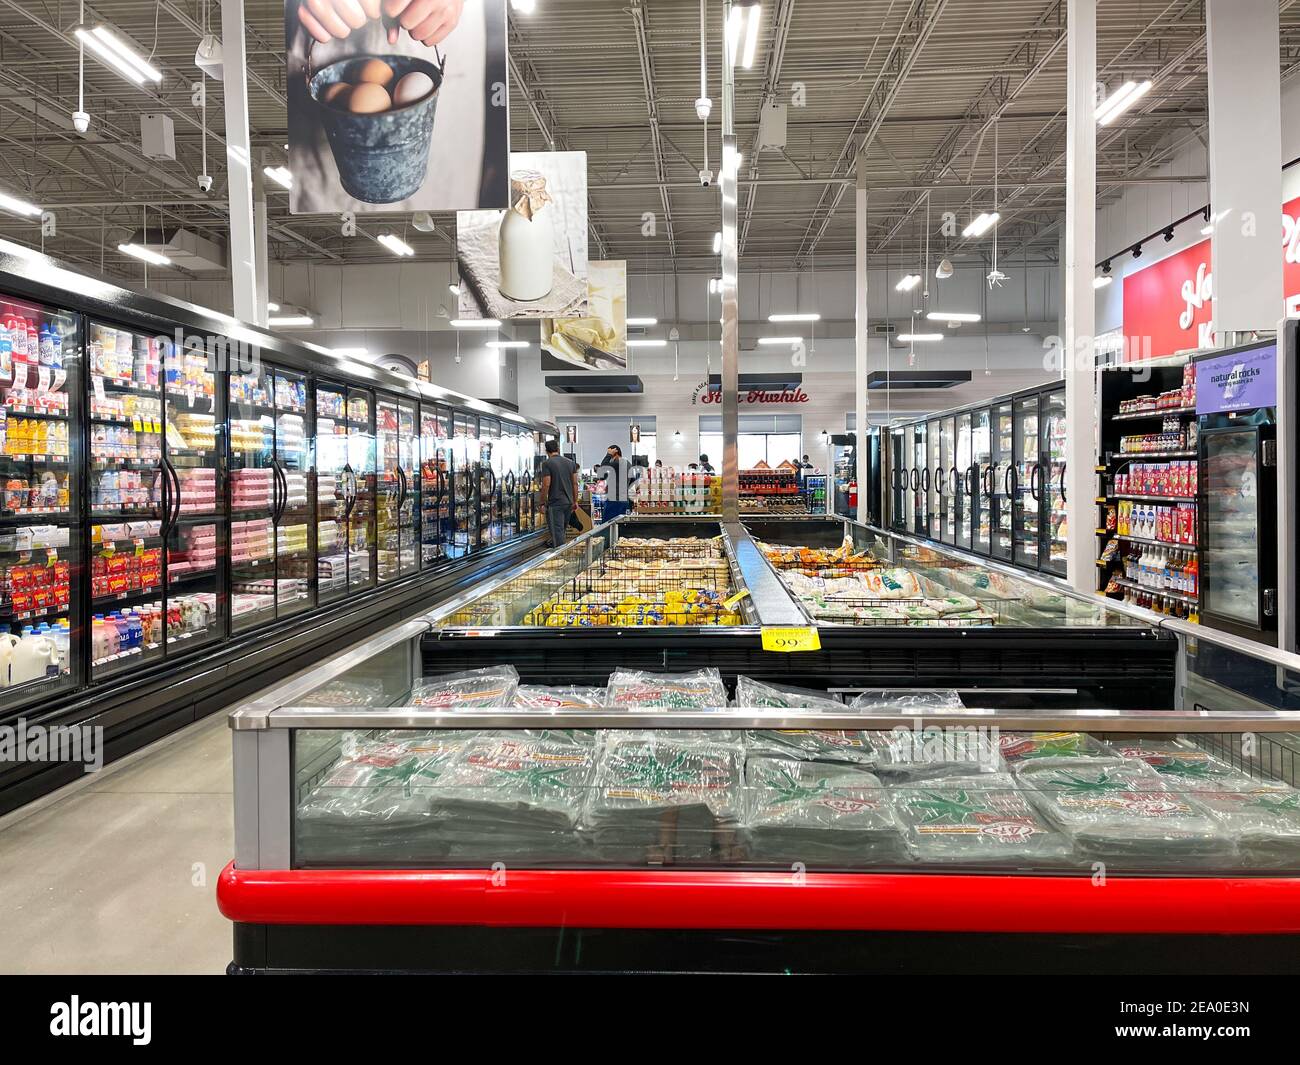 Orlando,FL USA - January 18, 2021:  An overview of the refridgerated section of a Bravo Market Grocery Store in Orlando, Florida. Stock Photo